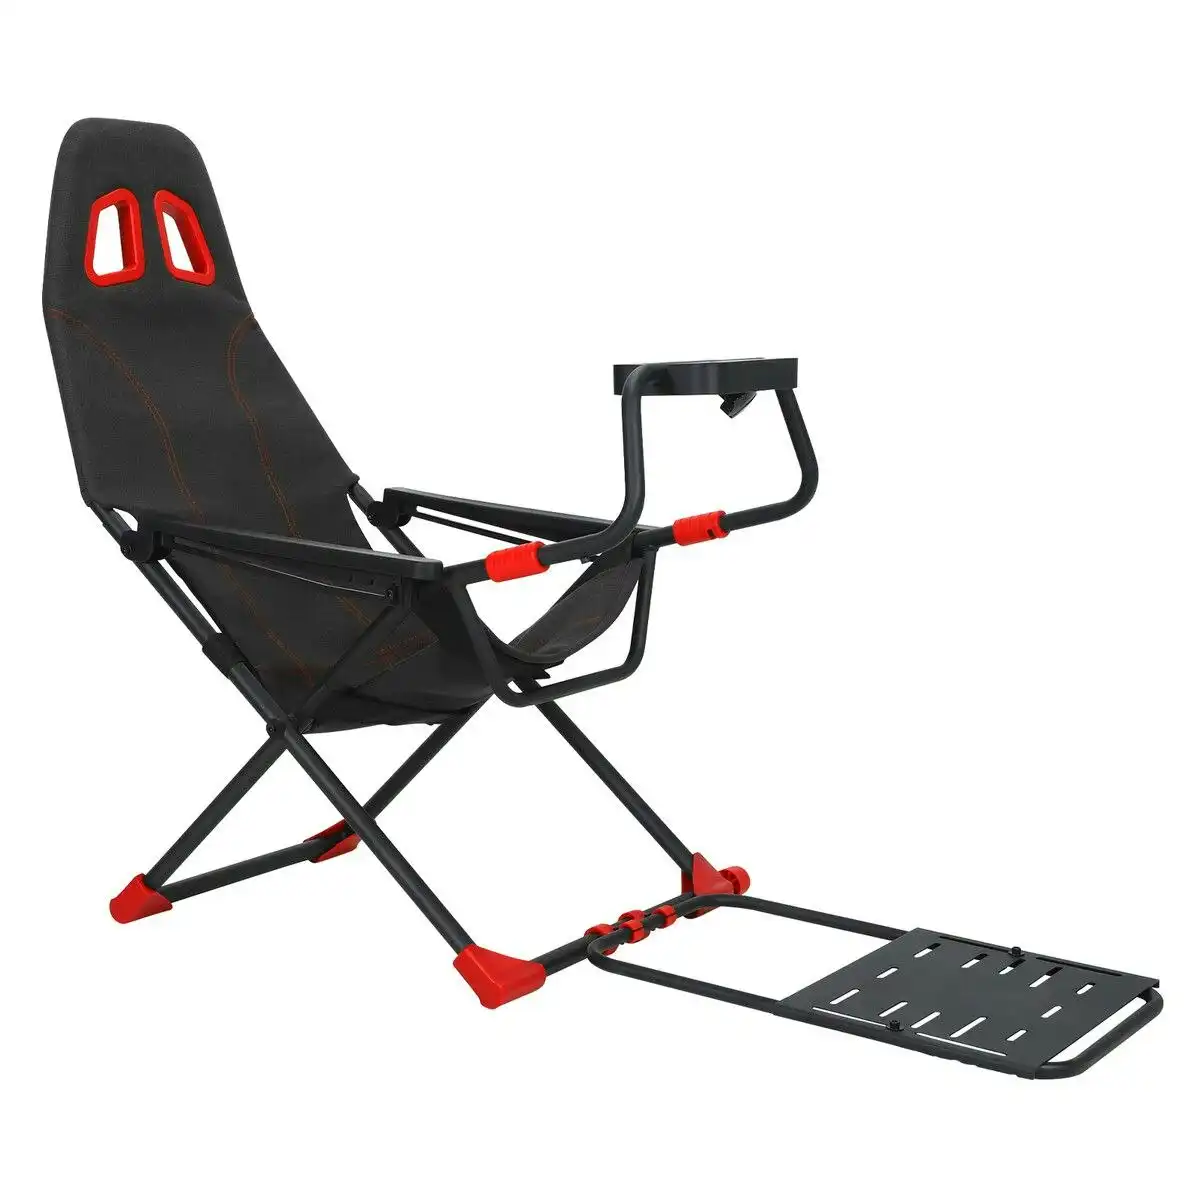 Ausway Racing Simulator Wheel Stand Sim Steering Gaming Foldable Adjustable Seat Cockpit Xbox Logitech Thrustmaster PS2 PS3